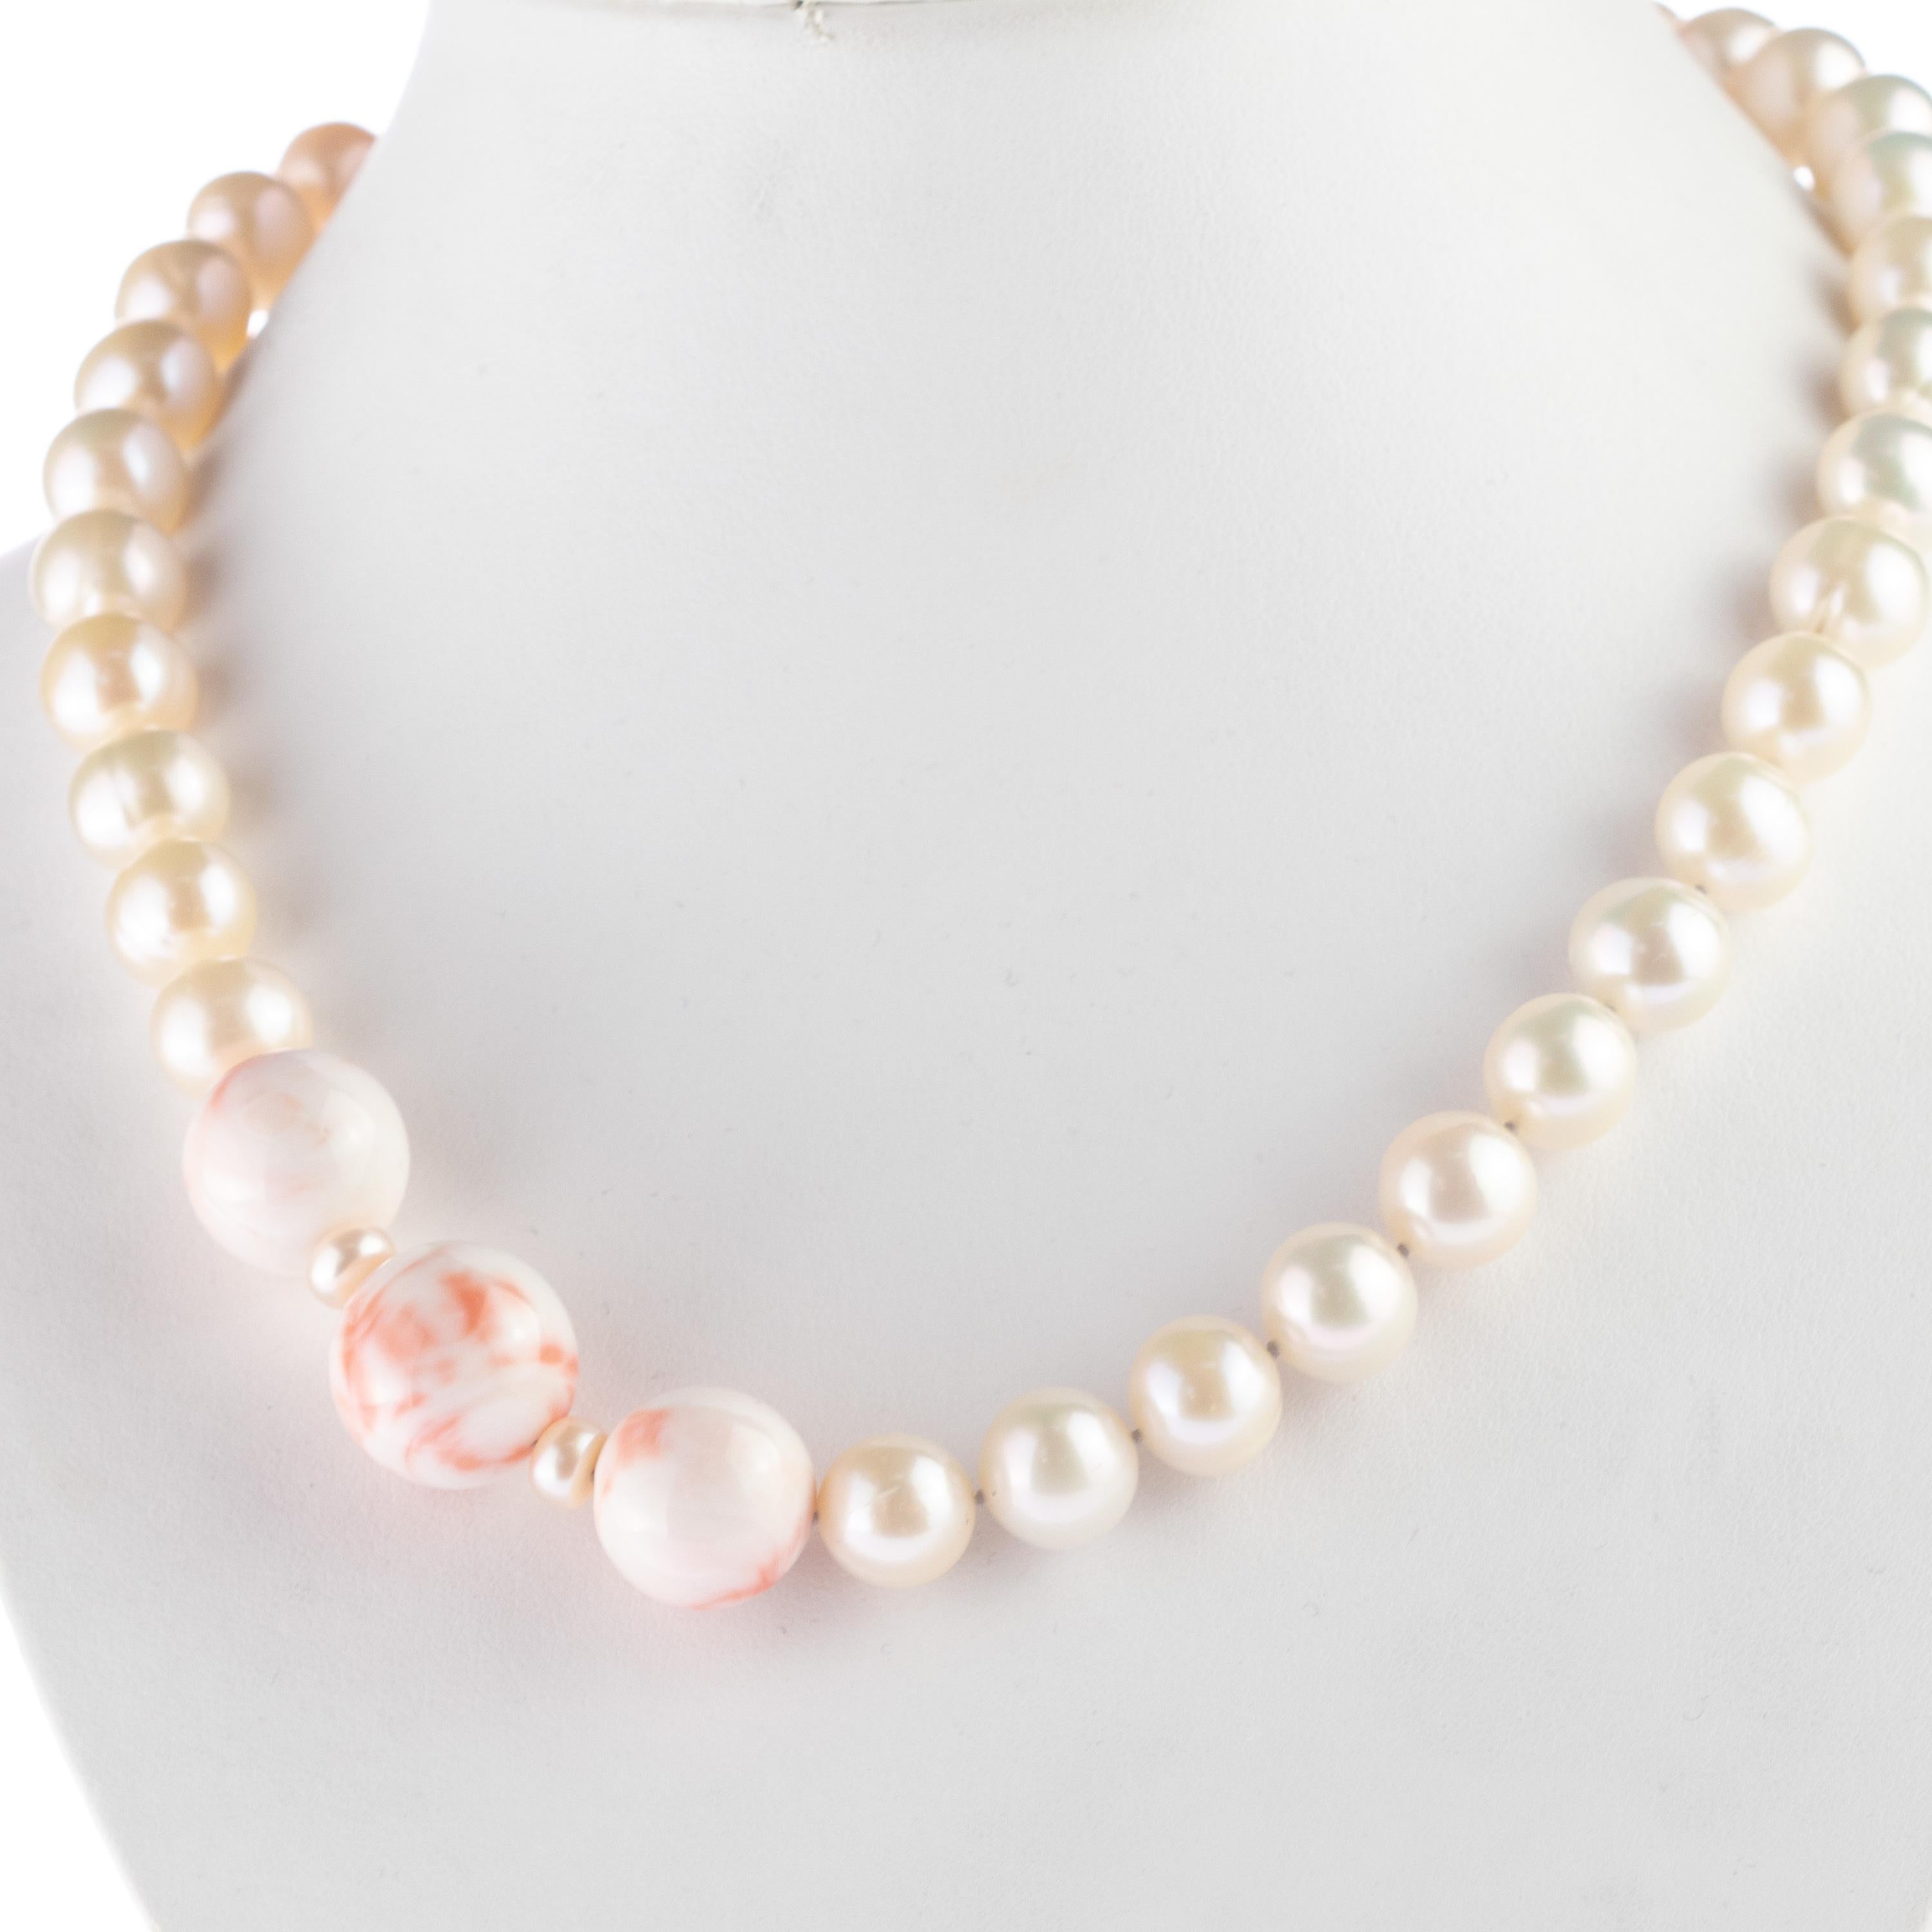 A timeless design meets charming coral. Top quality materials for a Made in Italy iconic necklace. First class freshwater pearls and coral with an elegant closure in 14k white gold. An iconic collier for an elegant outfit.

Pearls are thought to